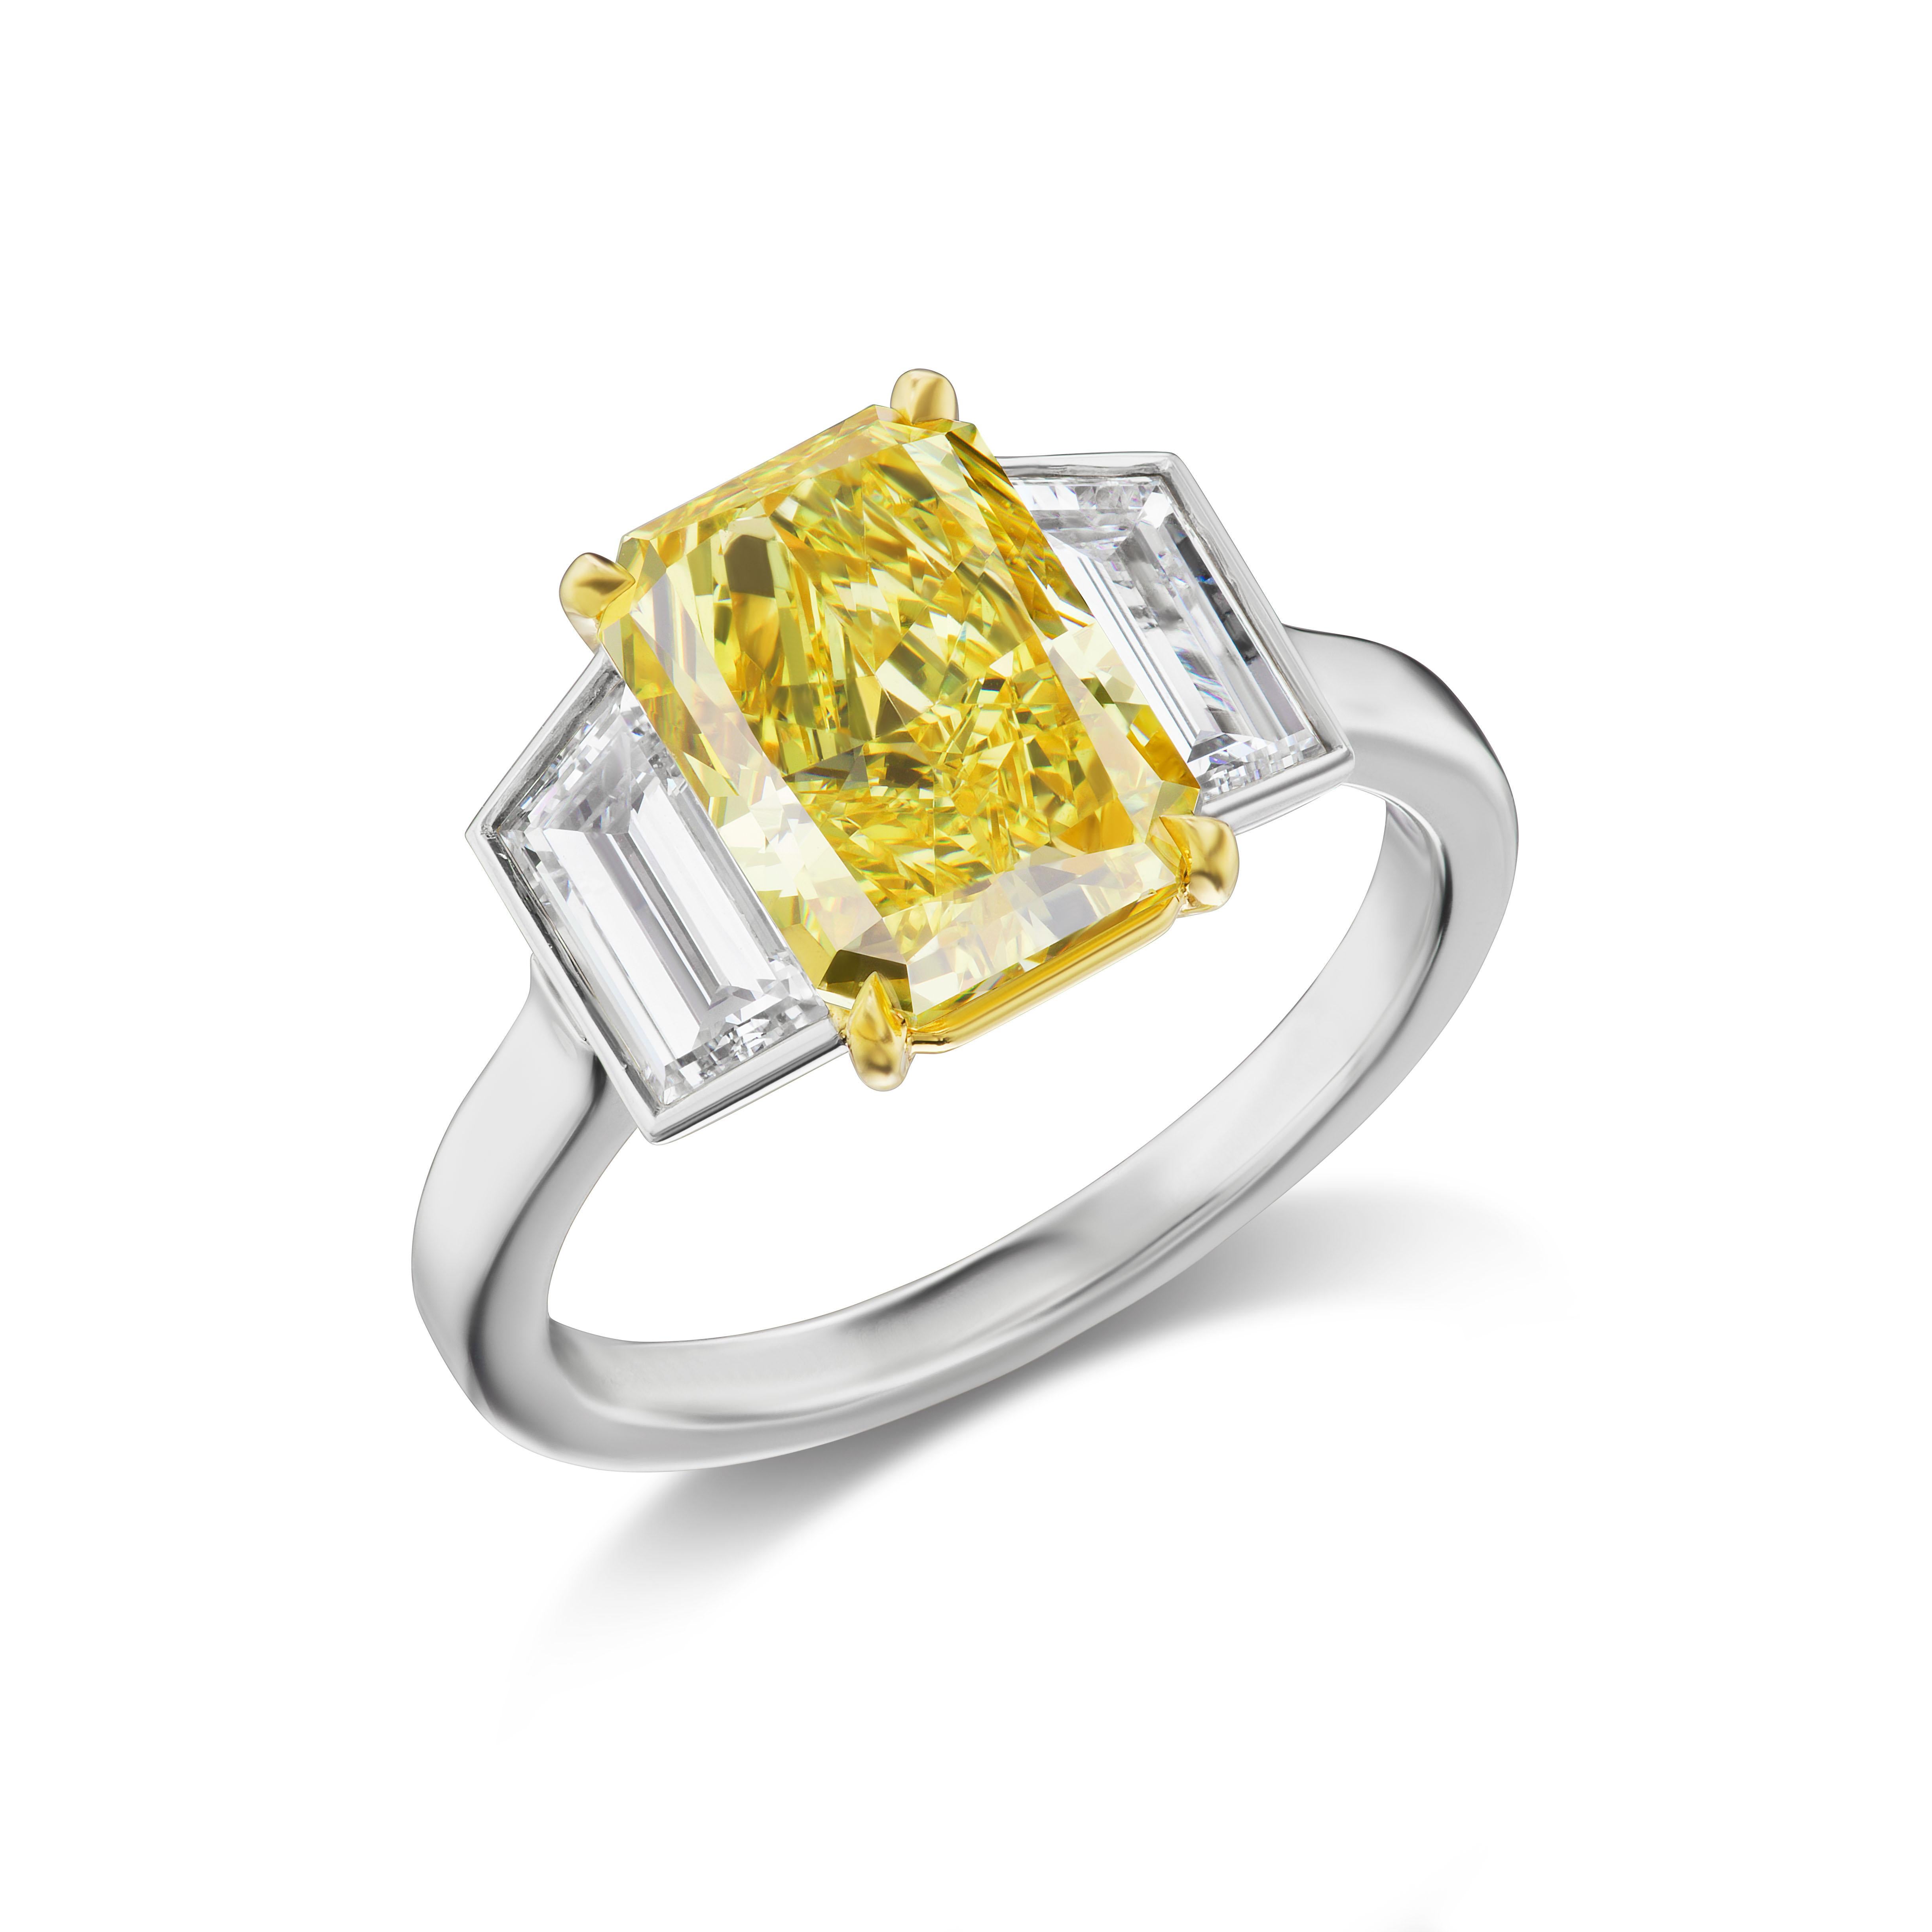 The 3.24 radiant-cut vivid yellow center stone is flanked by 2 trapezoidal diamonds weighing total 1.20 carats in a simple 18K gold and platinum 3 stone ring. The center stone exhibits an exceptional yellow hue, high saturation, and a lovely